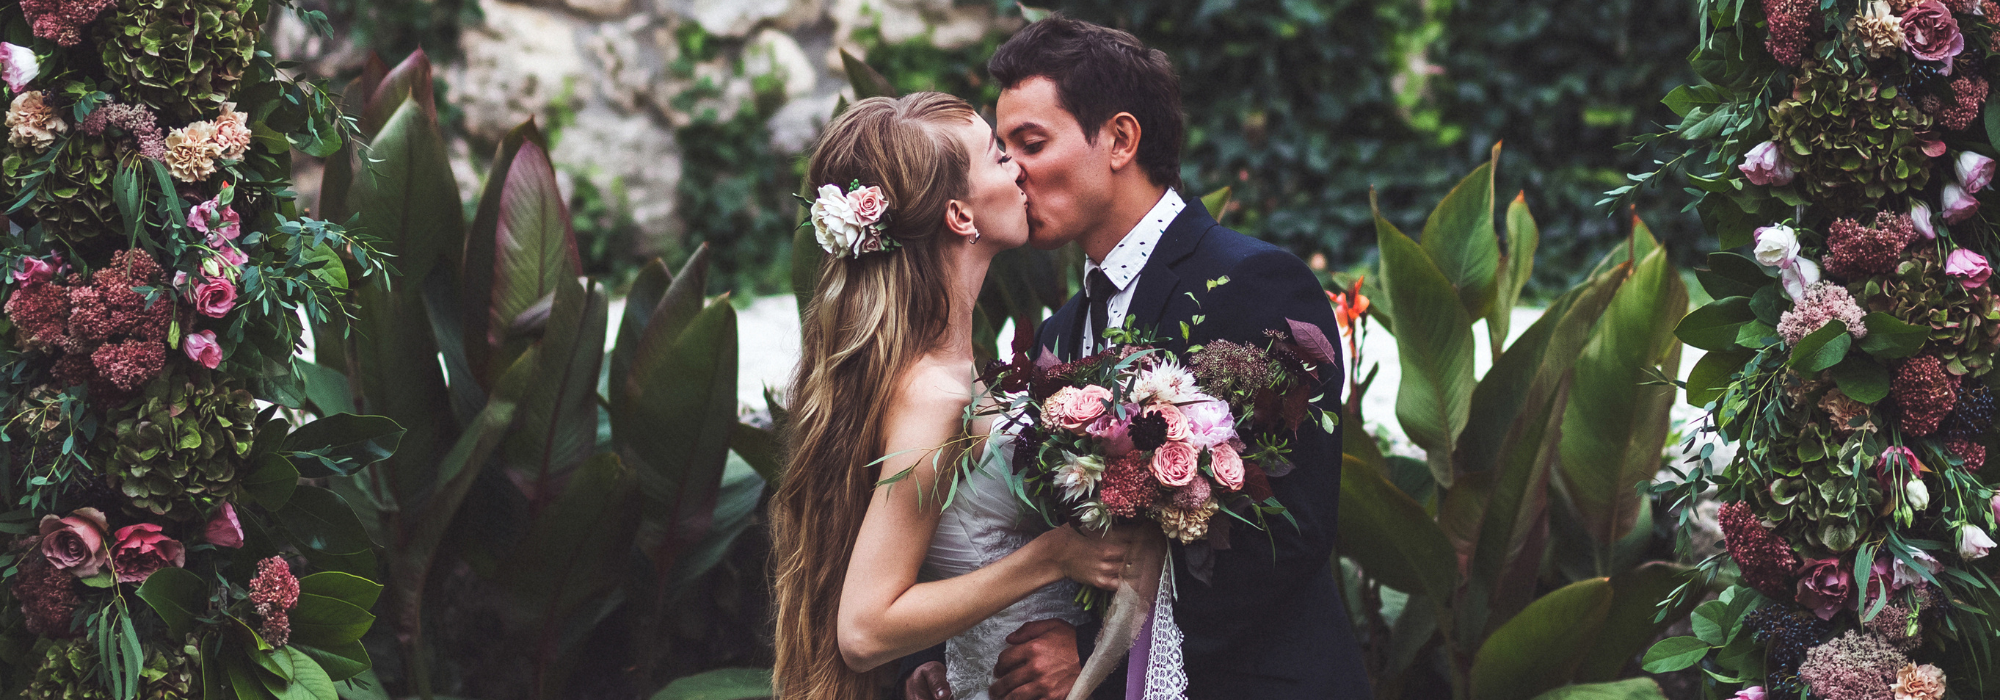 bride and groom kissing amidst beautiful florals 